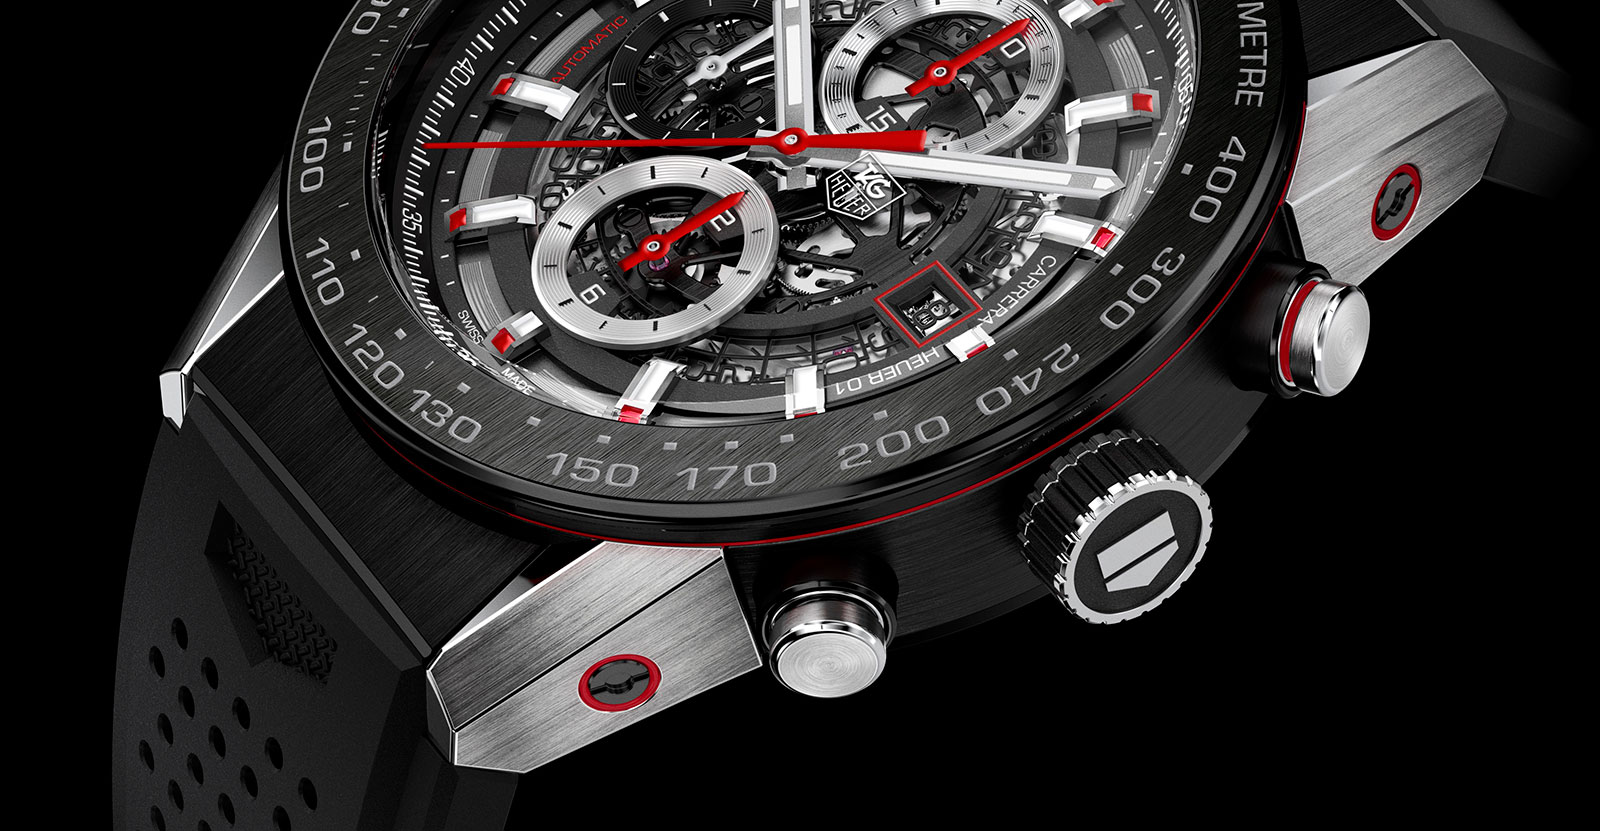 Popular Watches Of Baselworld 2015: TAG Heuer